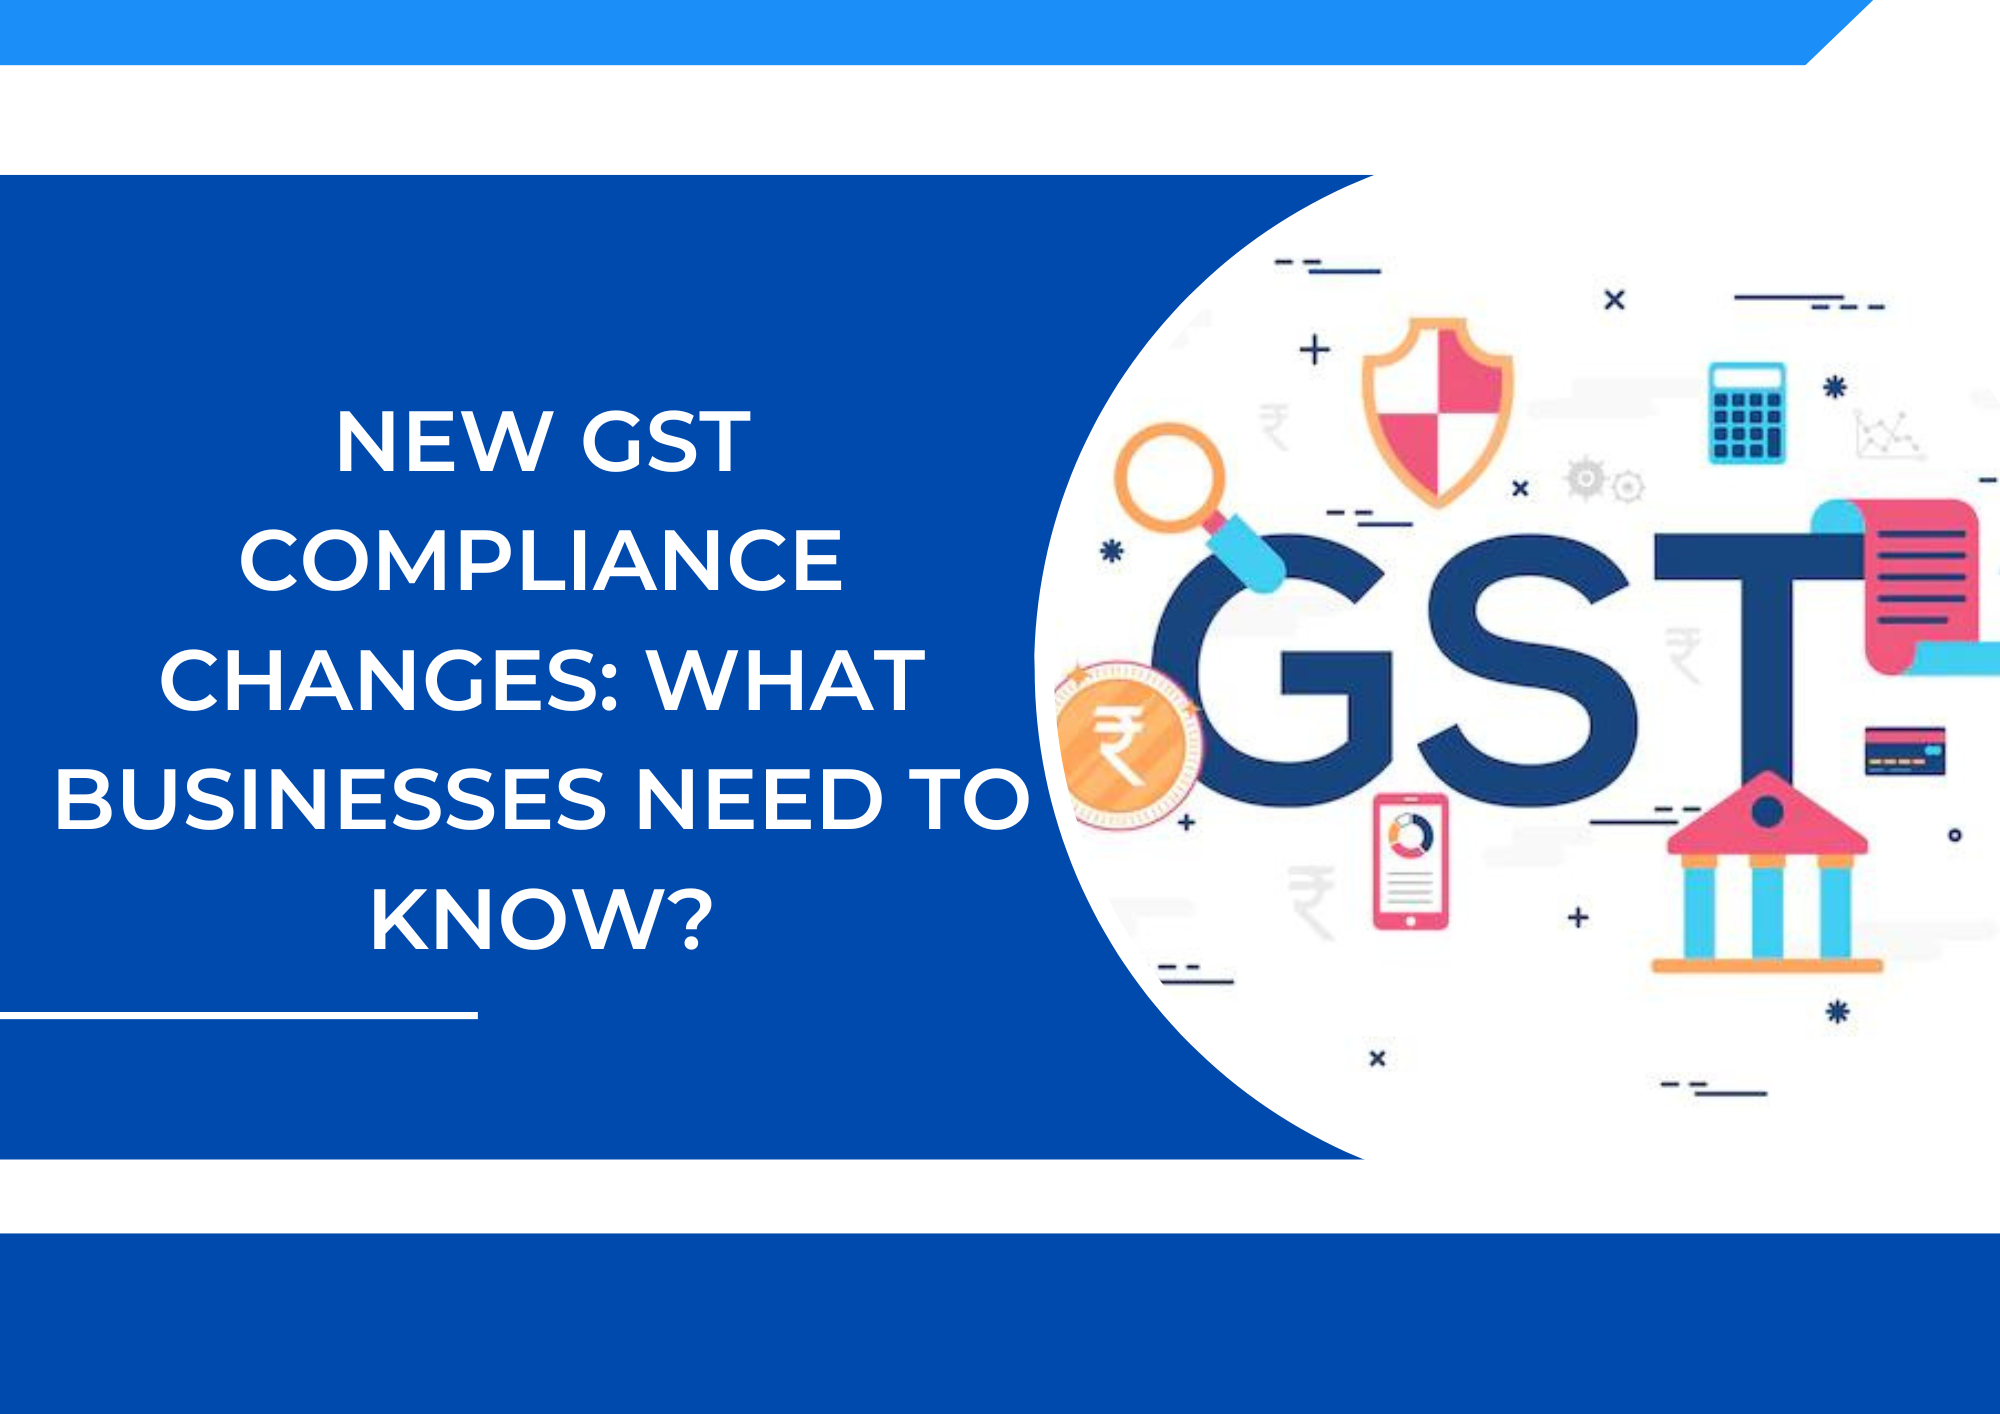 New GST Compliance changes: What Businesses Need to Know?